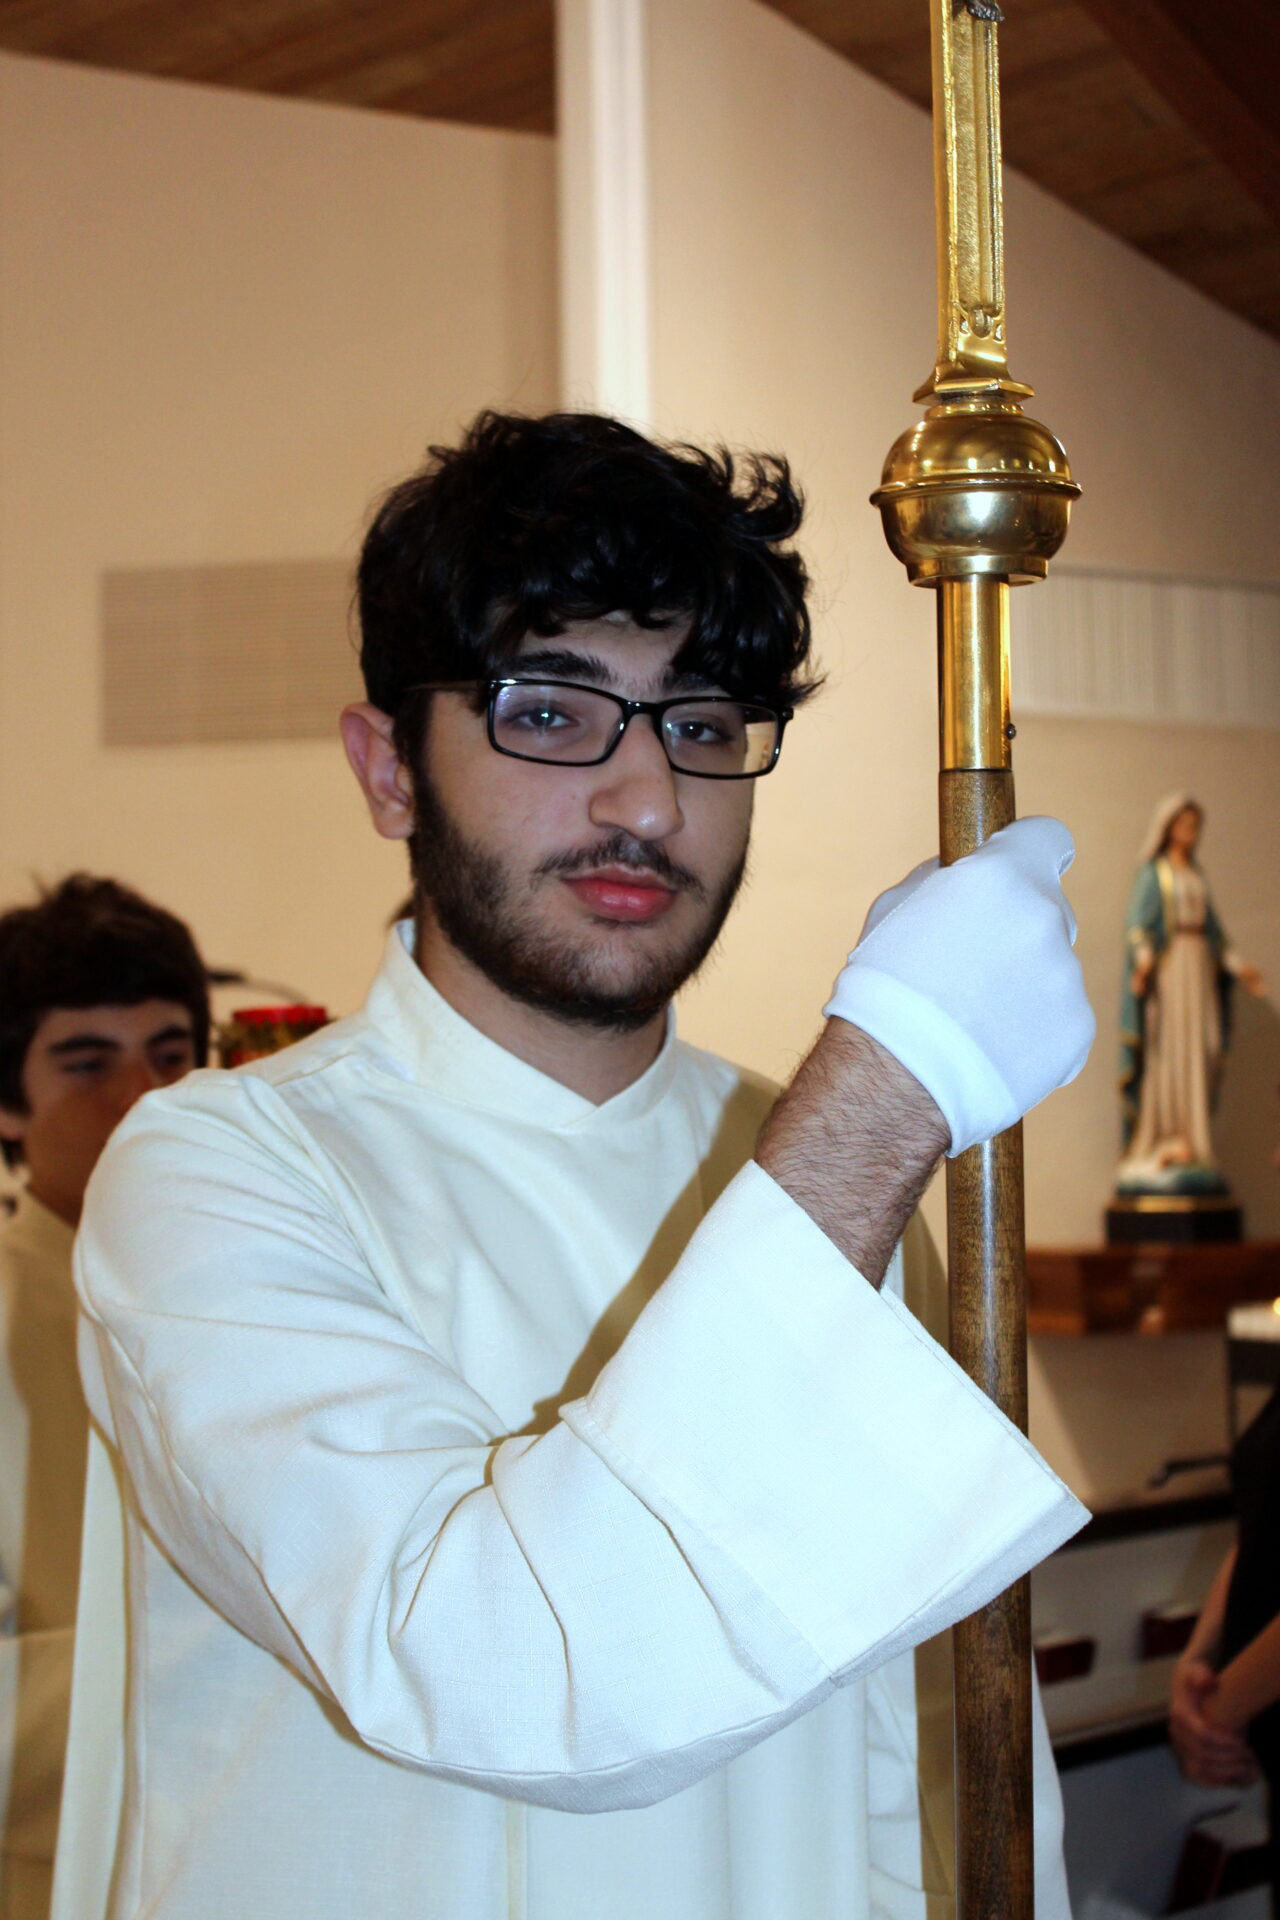 A sacristan with black eyeglass and white gloves